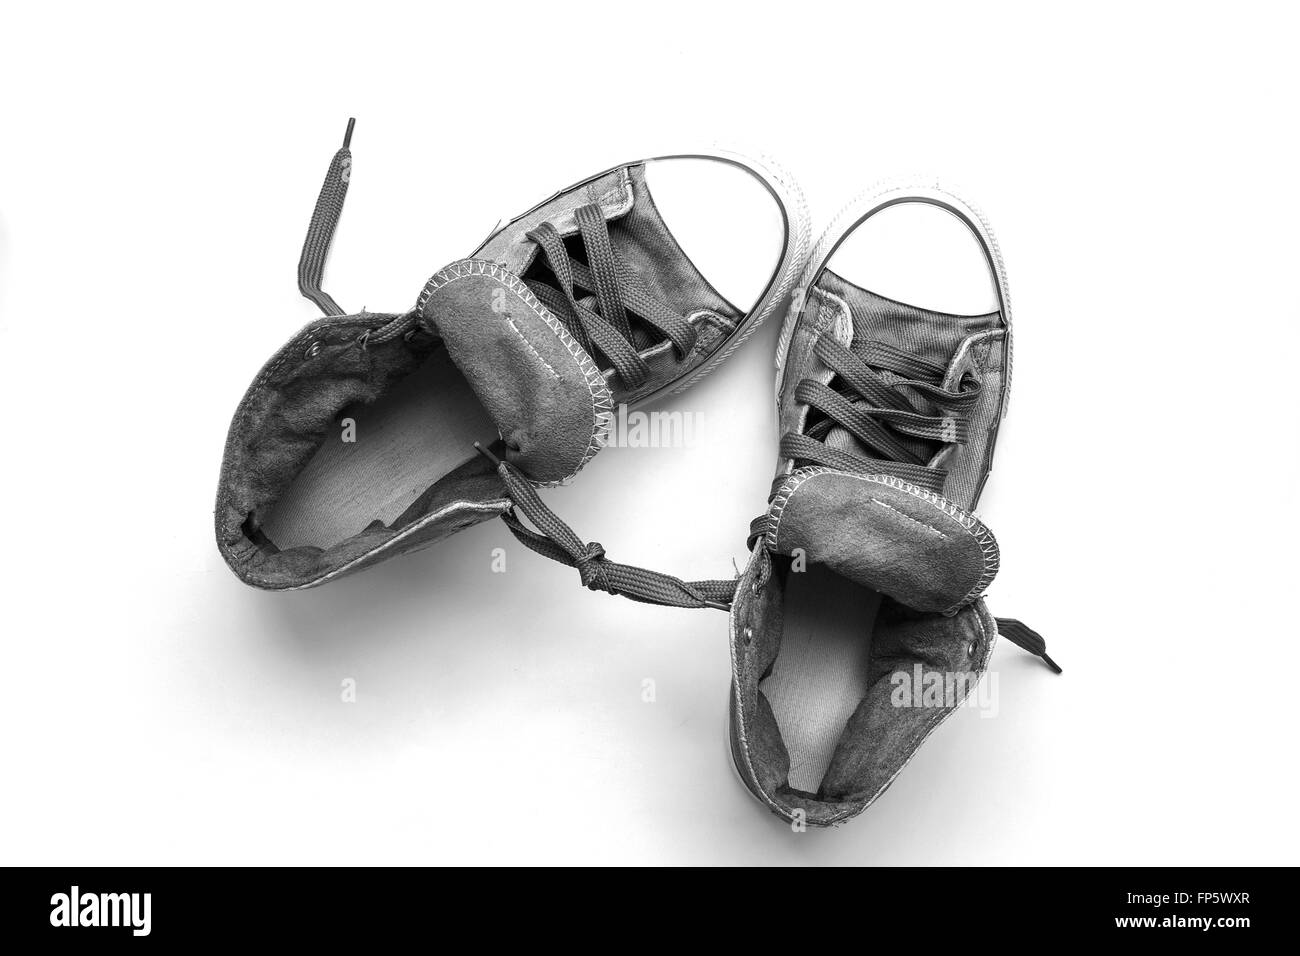 Sneakers shoes isolated on white background. Stock Photo